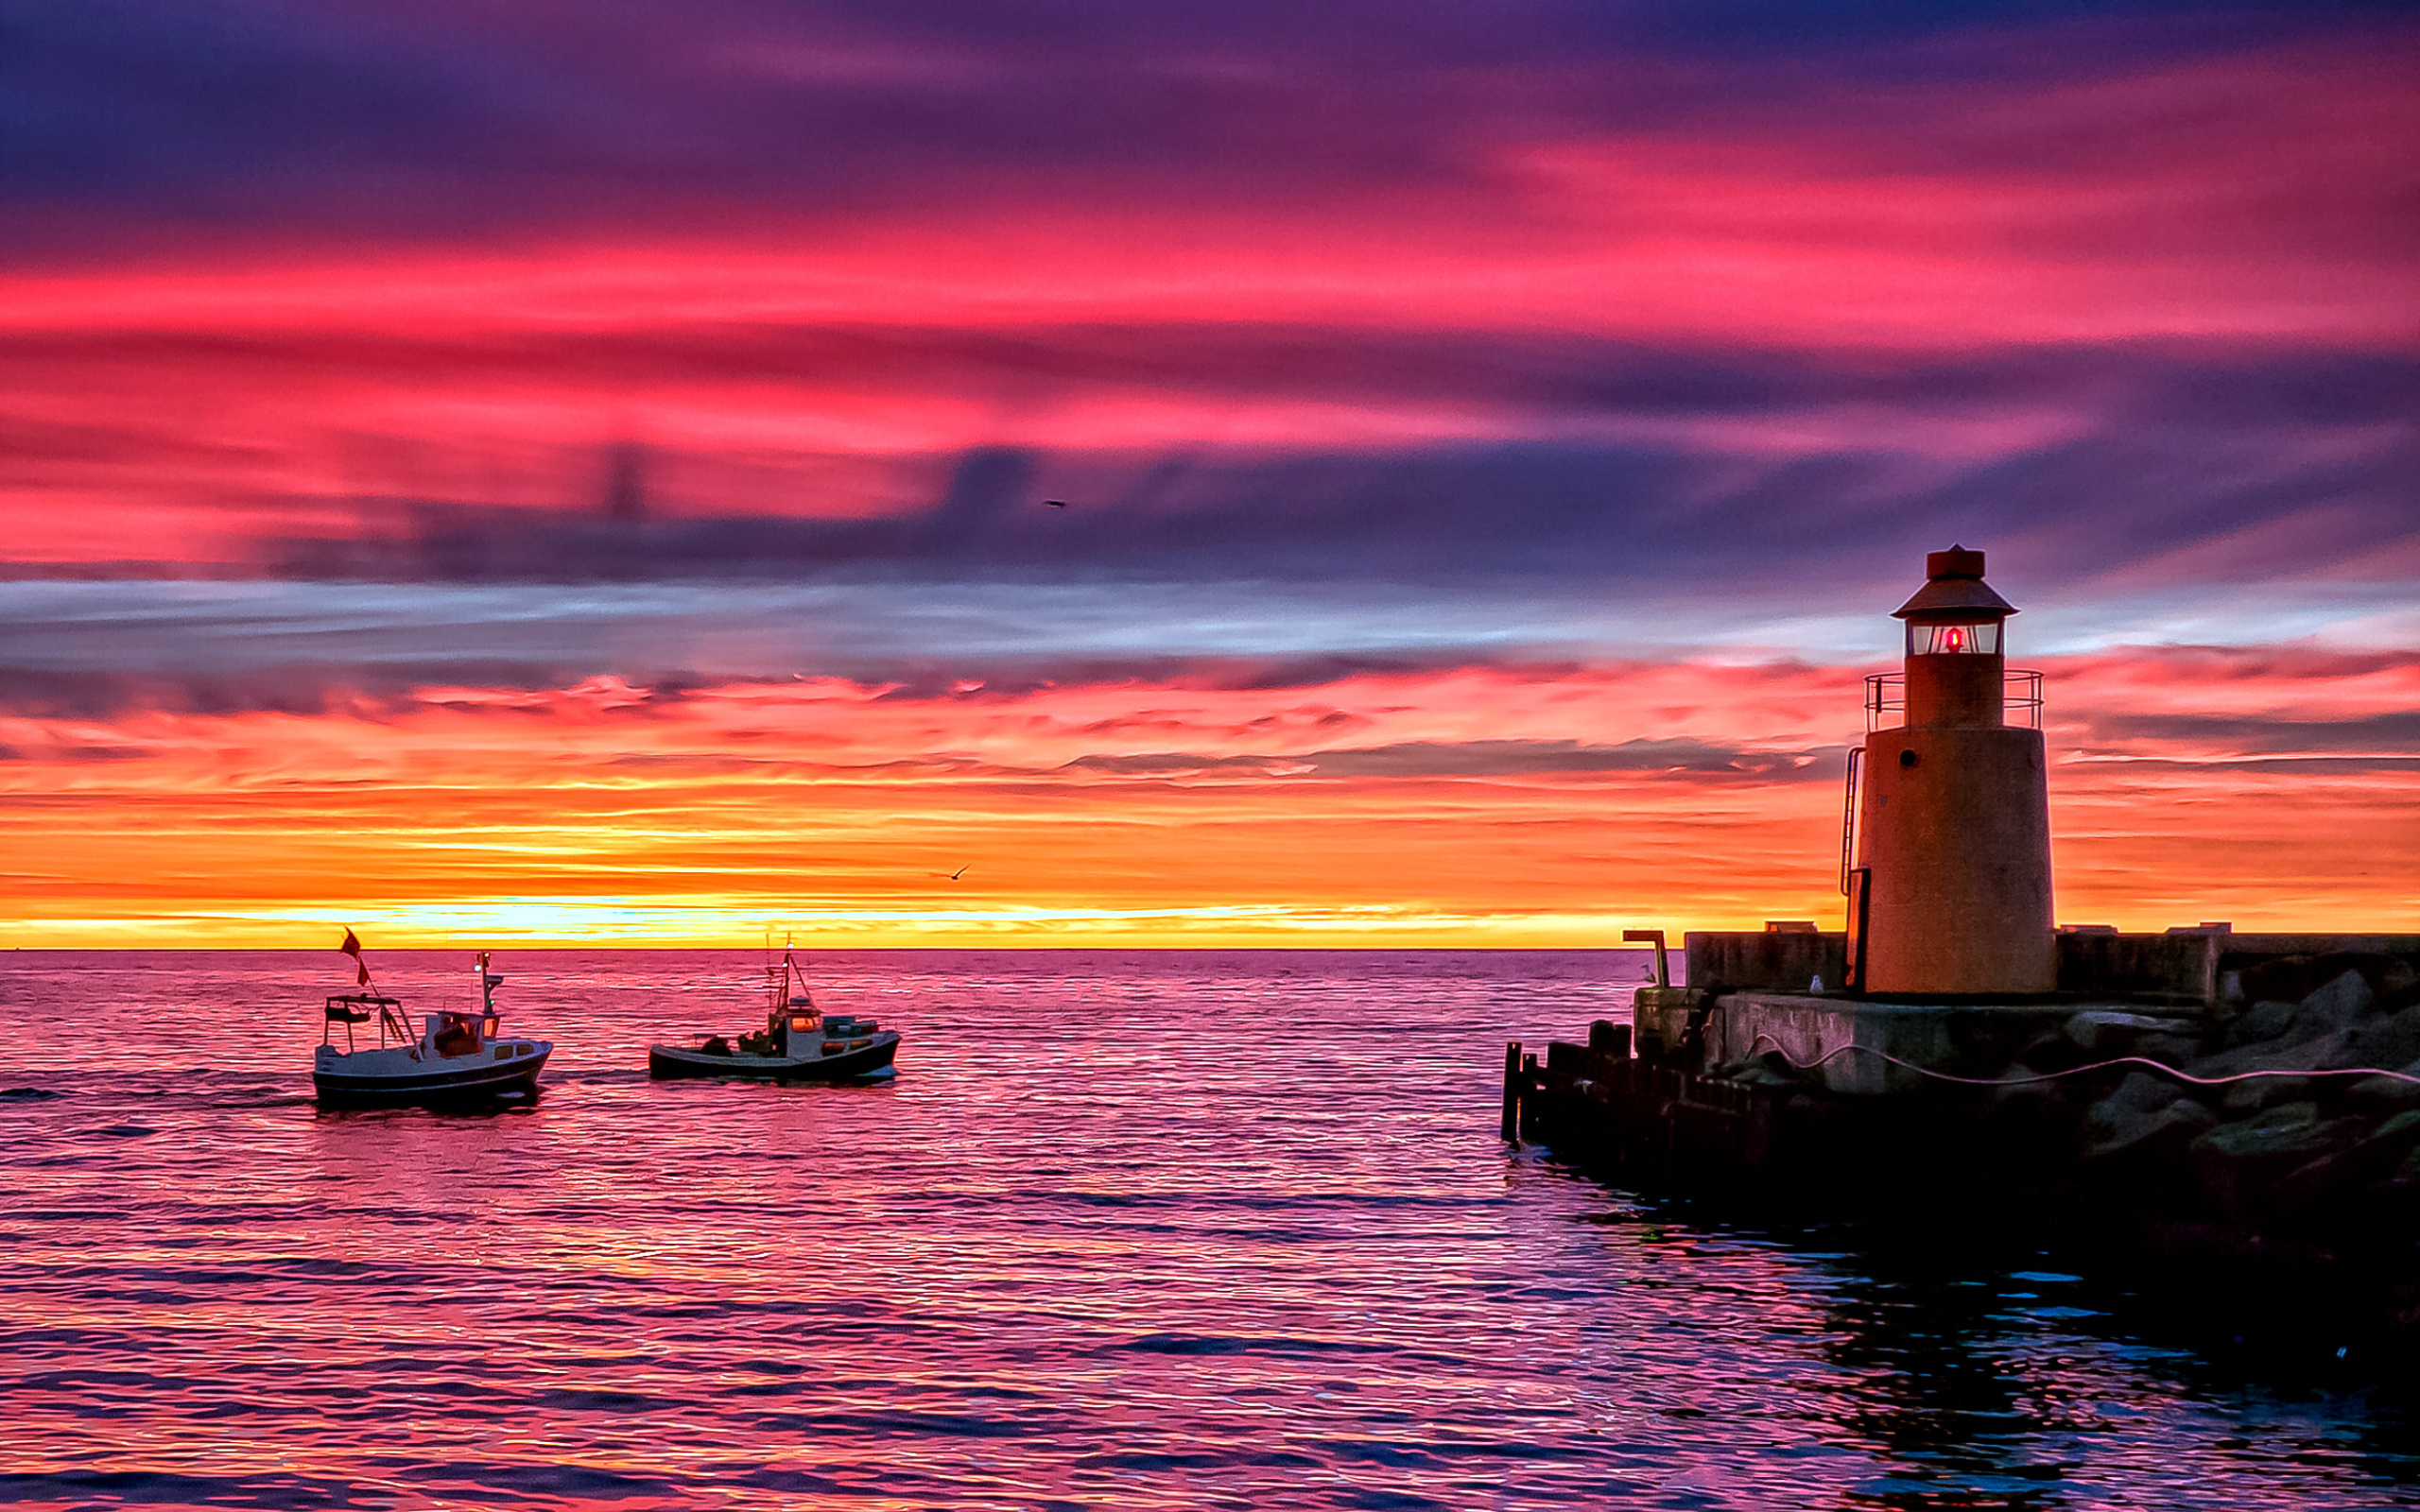 Check Out The New Lighthouse HD Wallpaper And Image Photos At